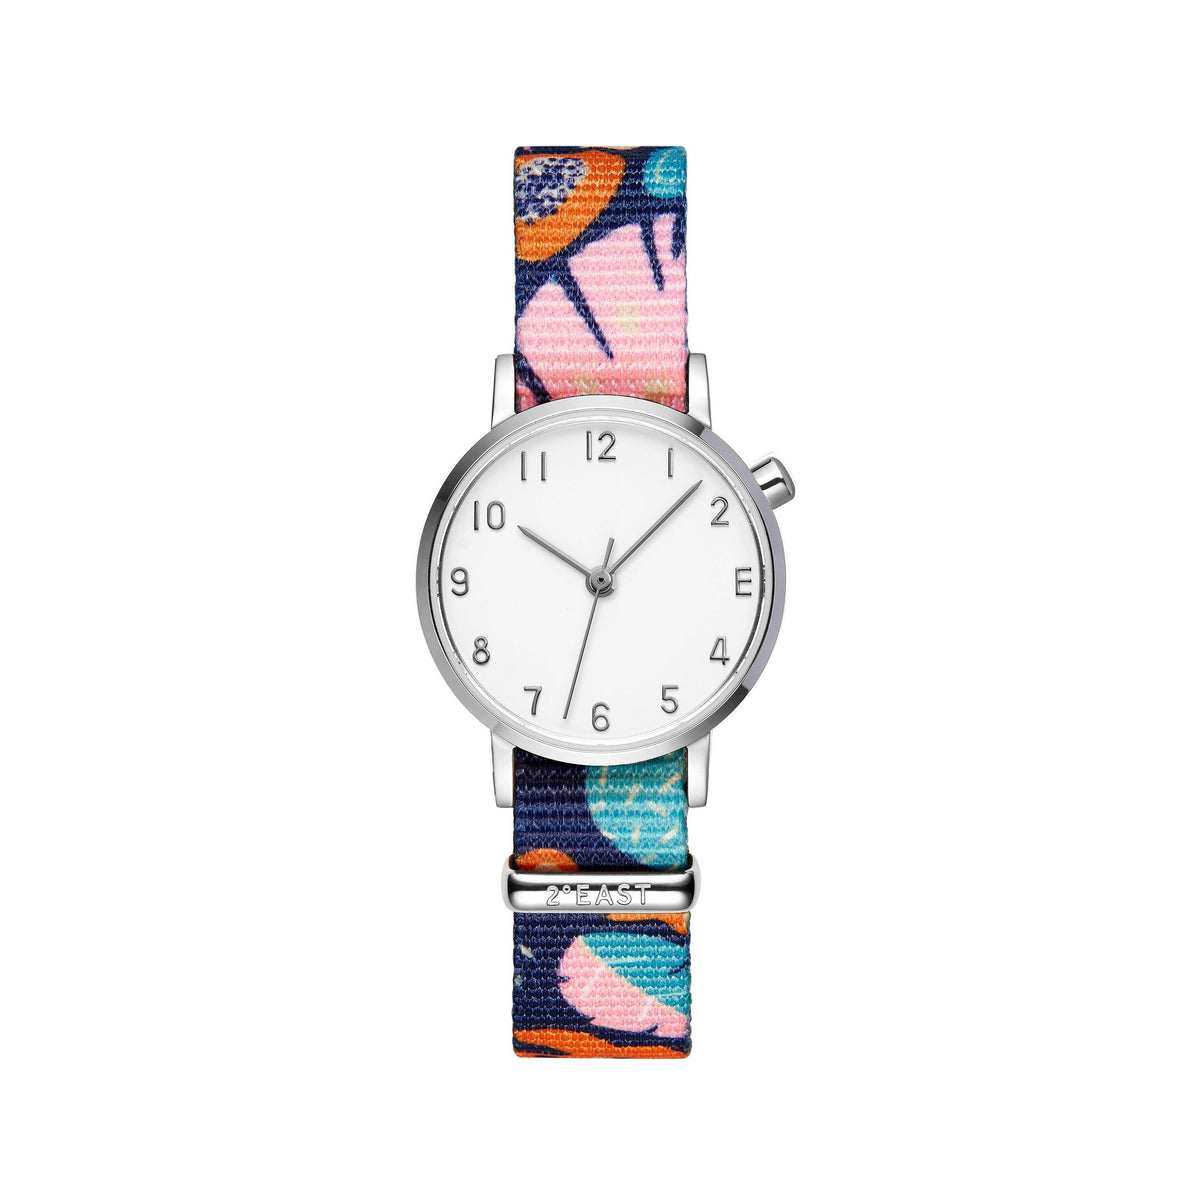 The White and Silver Watch - Tropical (Kids)